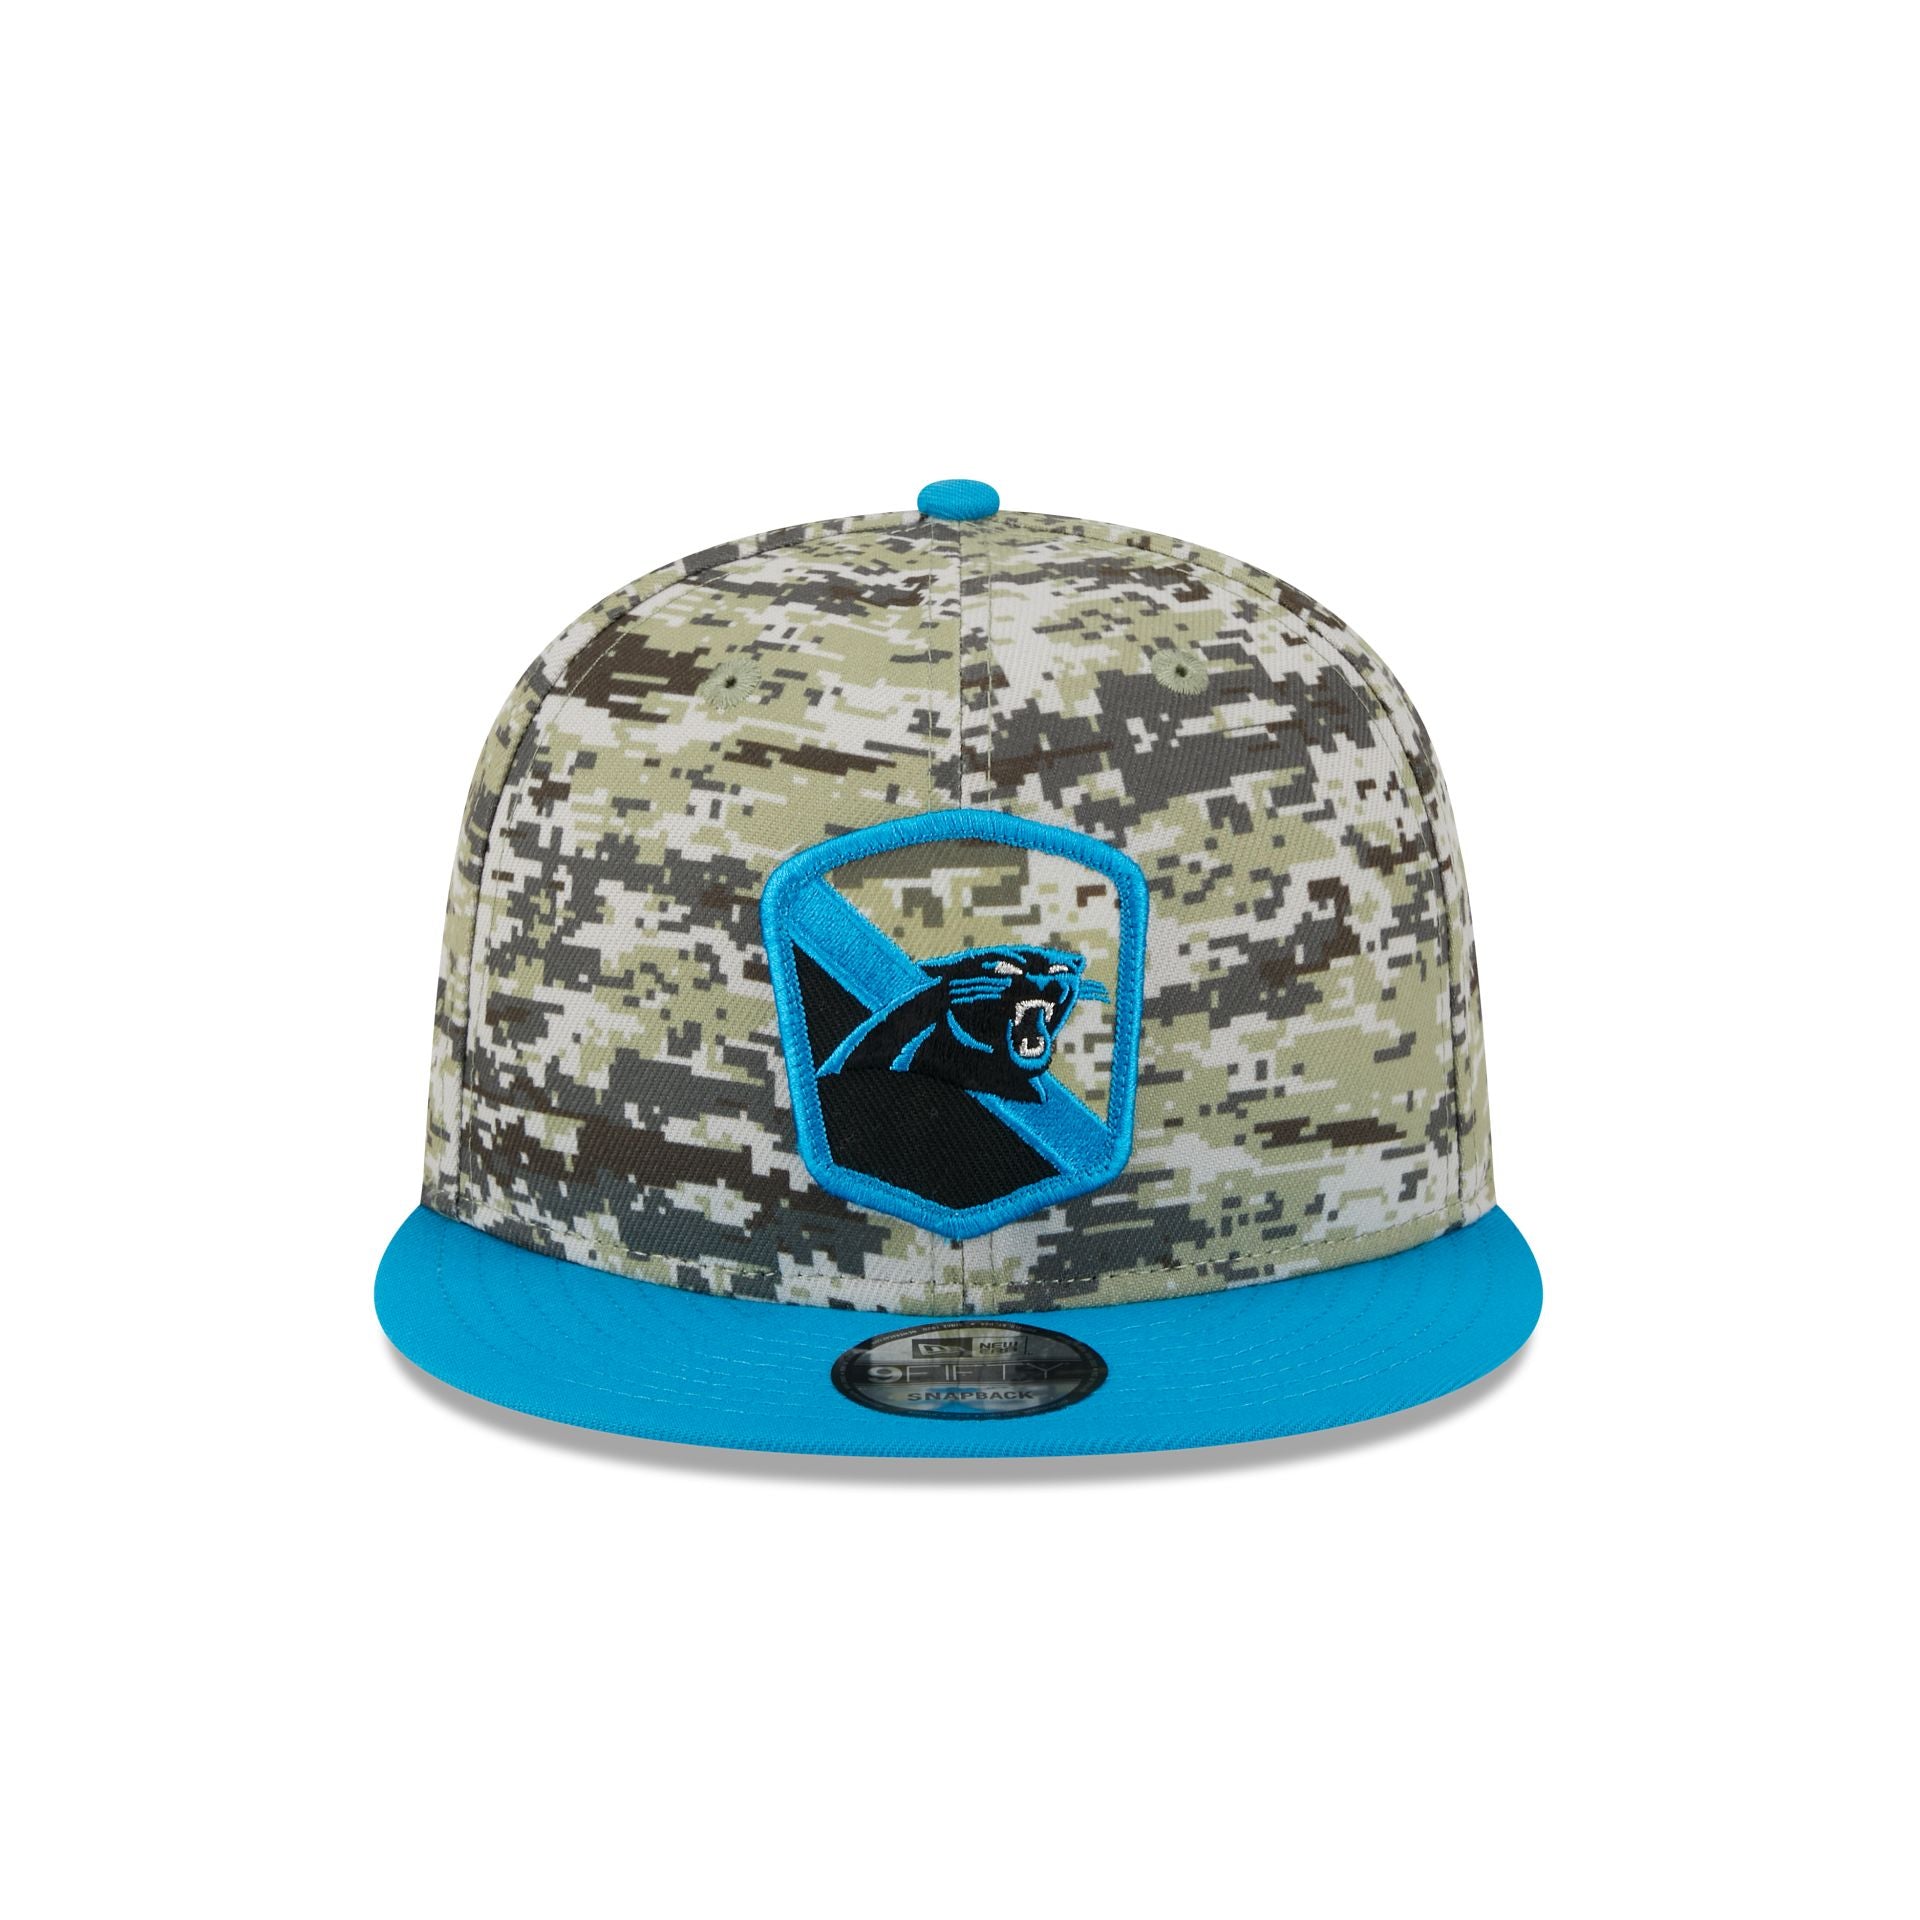 Erie Panthers Hat (Snapback)